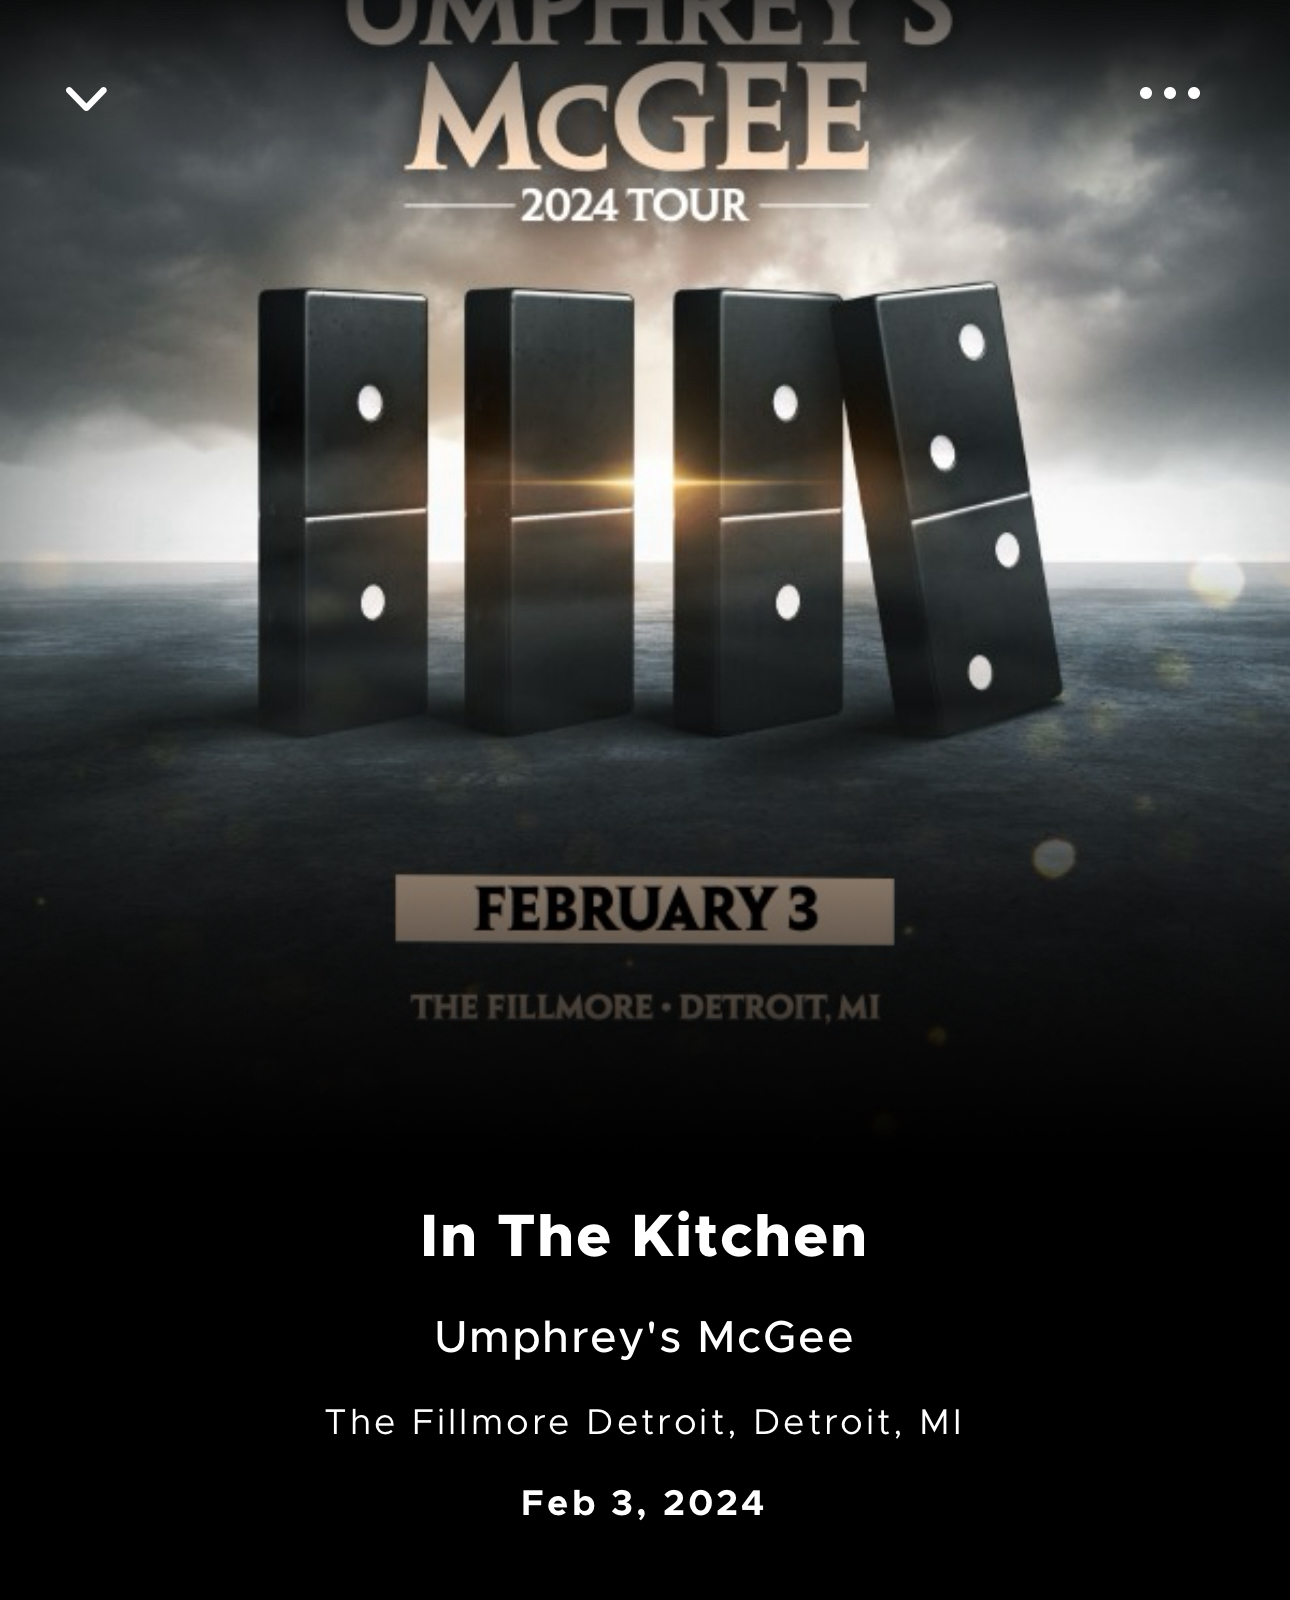 Promotional image for the Umphrey’s McGee 2024 Tour featuring three domino pieces against a dramatic sky backdrop with the date February 3 at The Fillmore Detroit, MI, and the title “In The Kitchen.